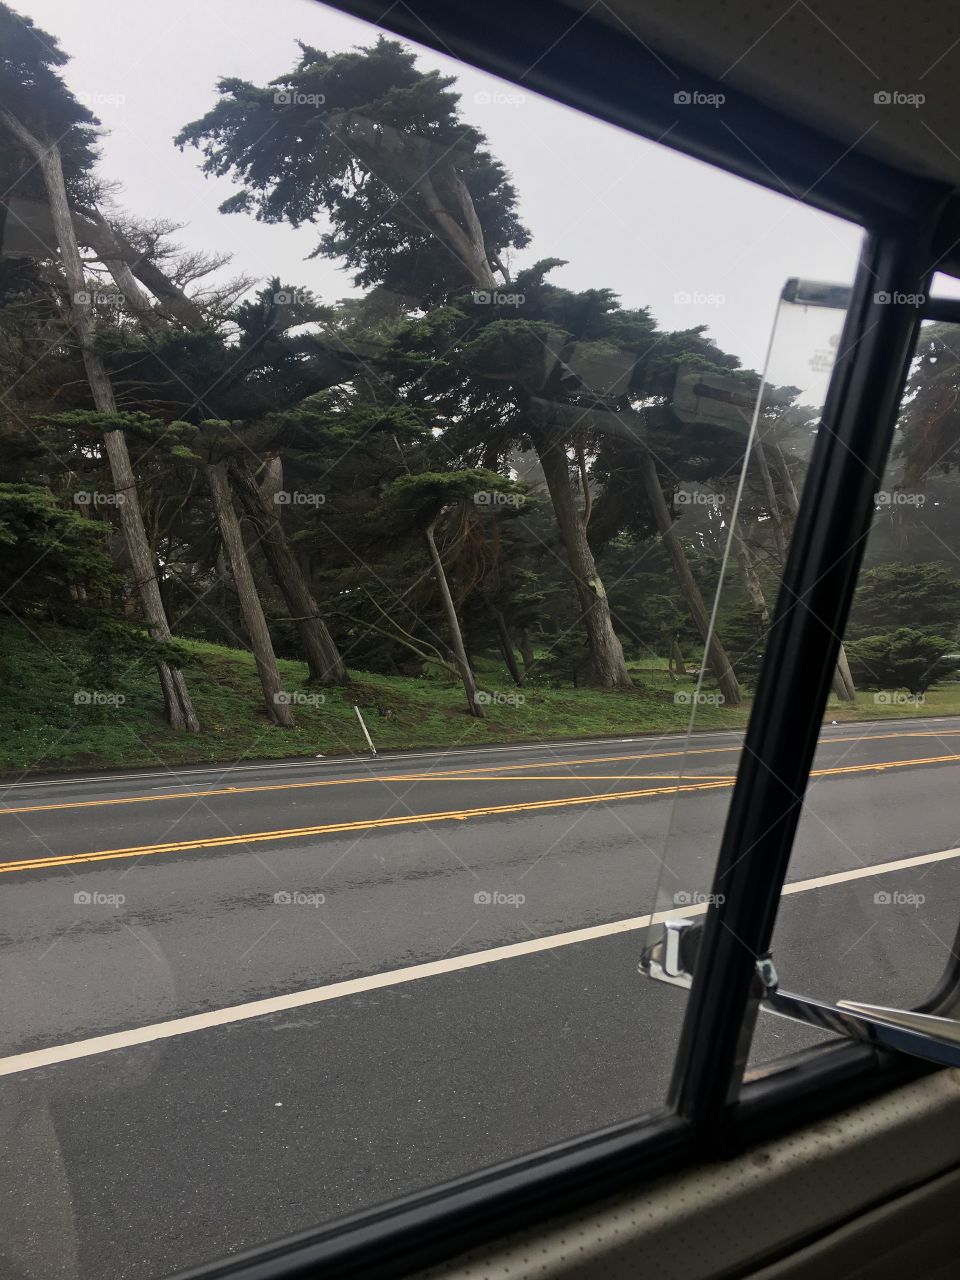 View from our bus tour in San Francisco! I though the angle of the trees was cool!